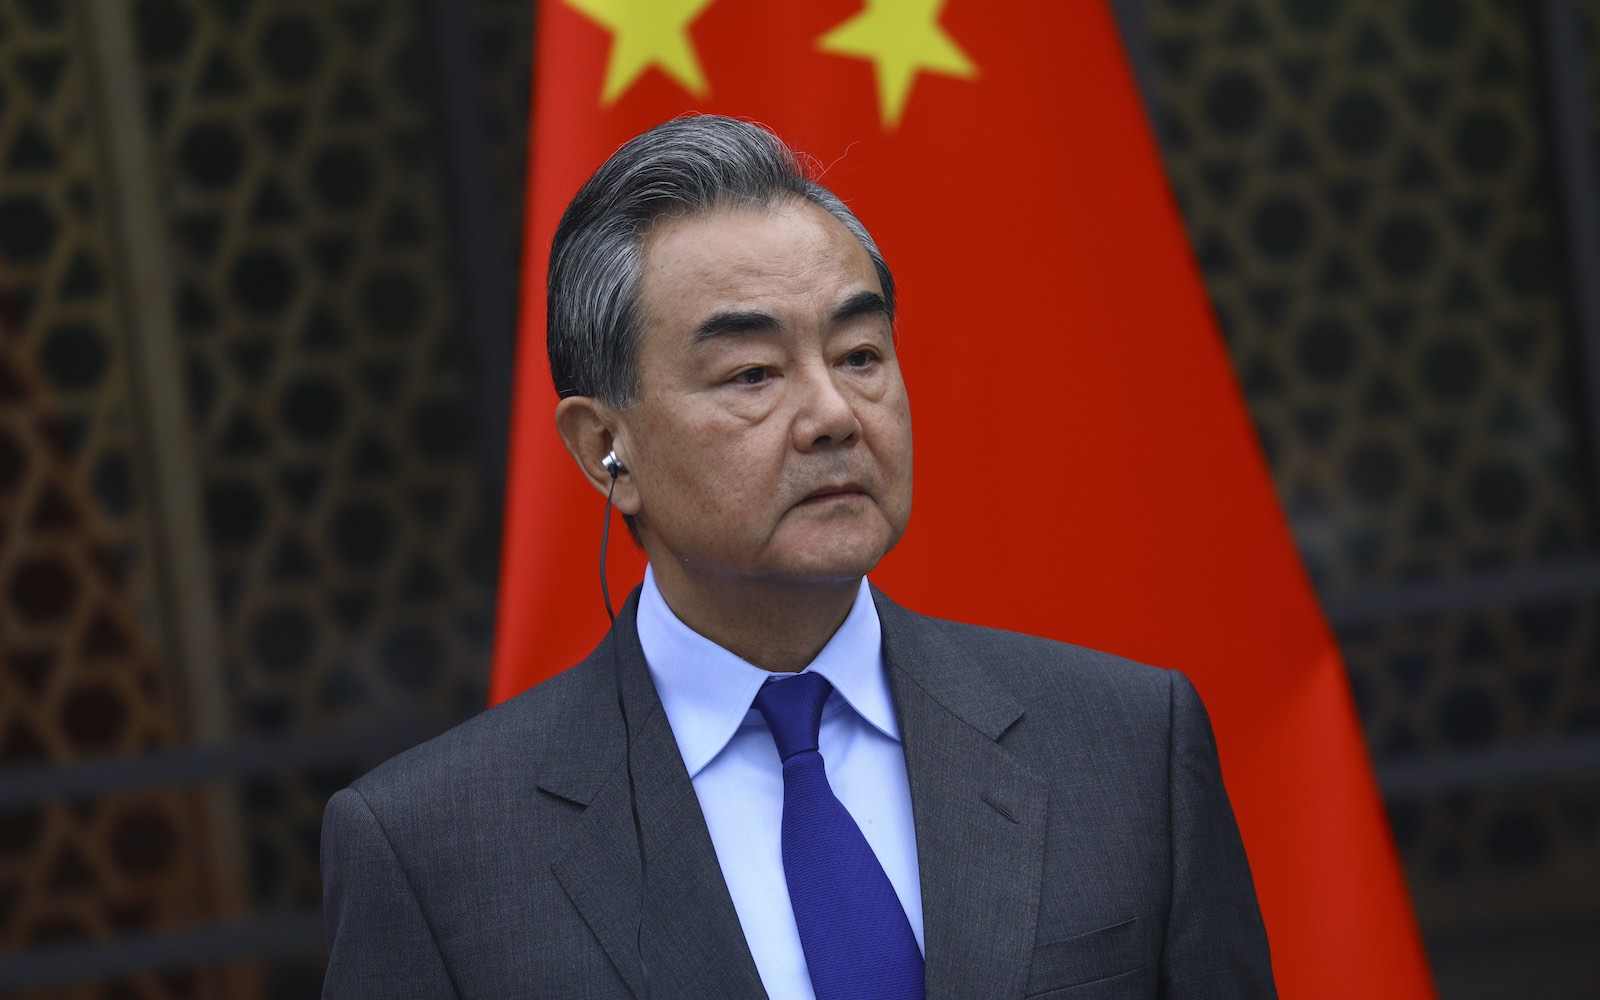 China’s Foreign Minister Wang Yi at a joint press conference with Russia’s FM Sergey Lavrov, Beijing, 23 March (Russian Foreign Ministry Press Service/Handout/Anadolu Agency via Getty Images)